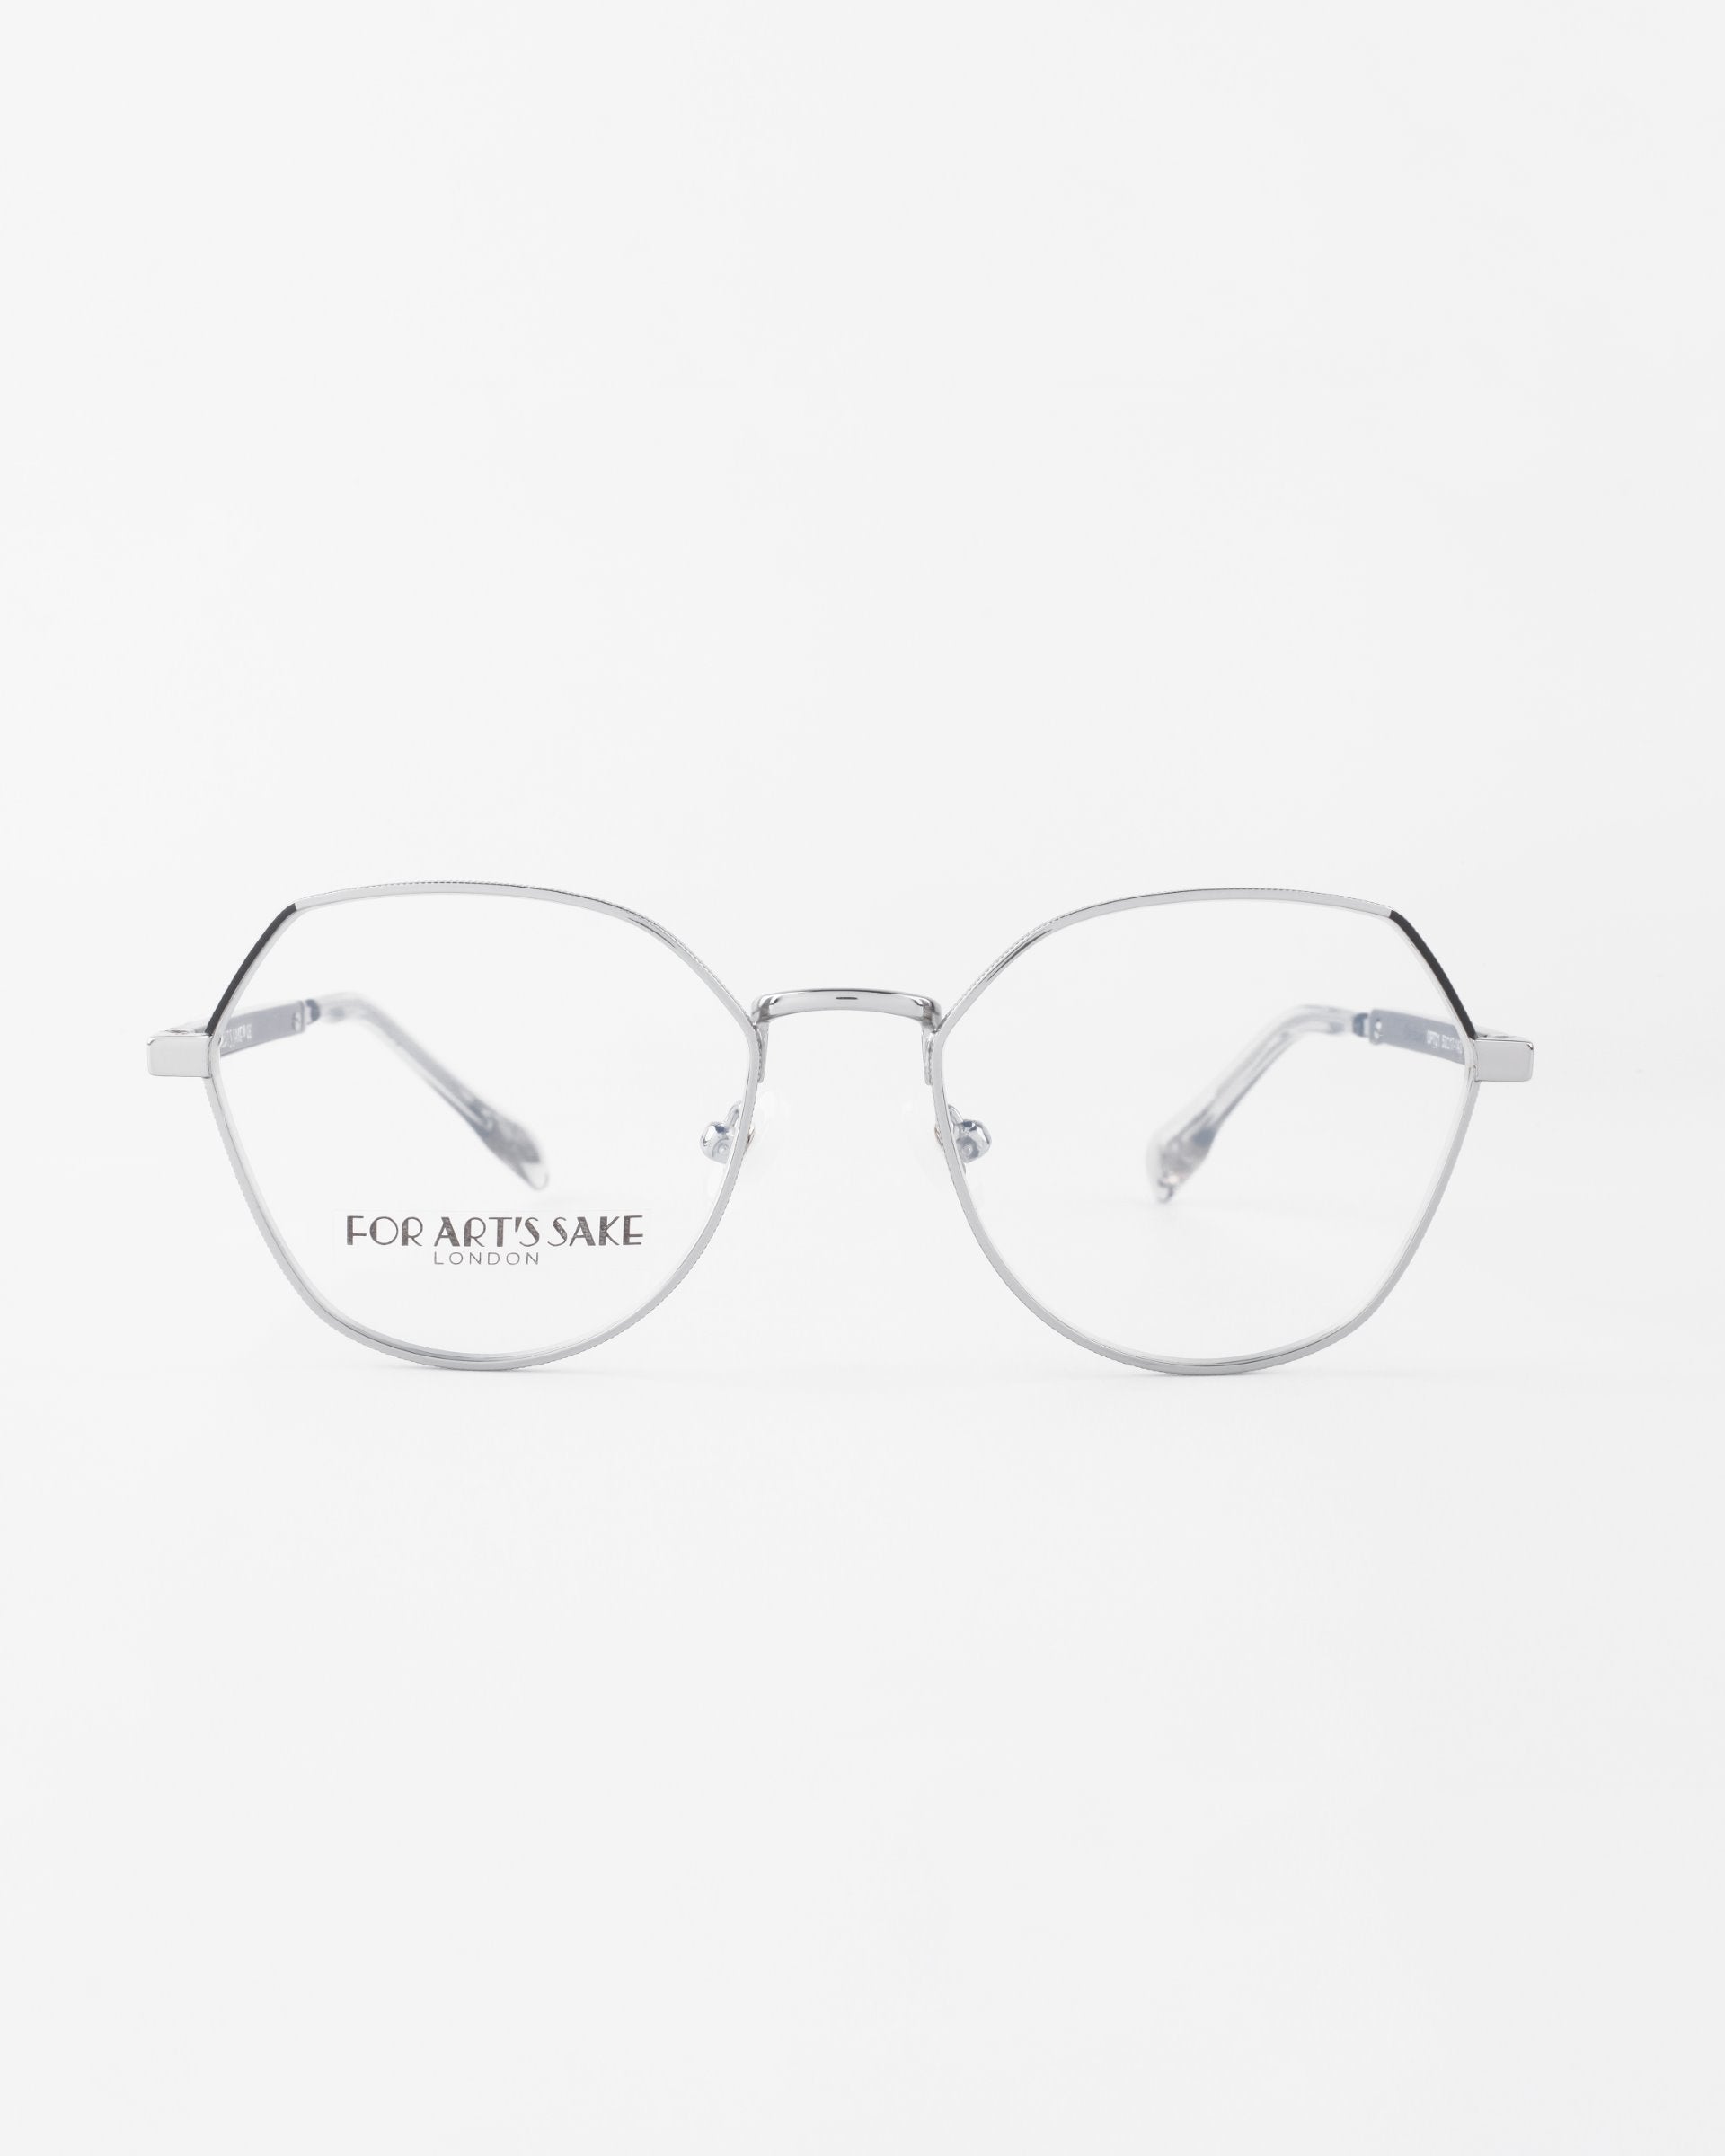 Image of a pair of sleek metal eyeglasses with a minimalist design. Featuring hexagonal gold-plated frames, clear lenses, and thin temples, the Orchard glasses offer both style and functionality. The brand name "For Art's Sake®" is printed in small text on the left lens. The background is a clean white.